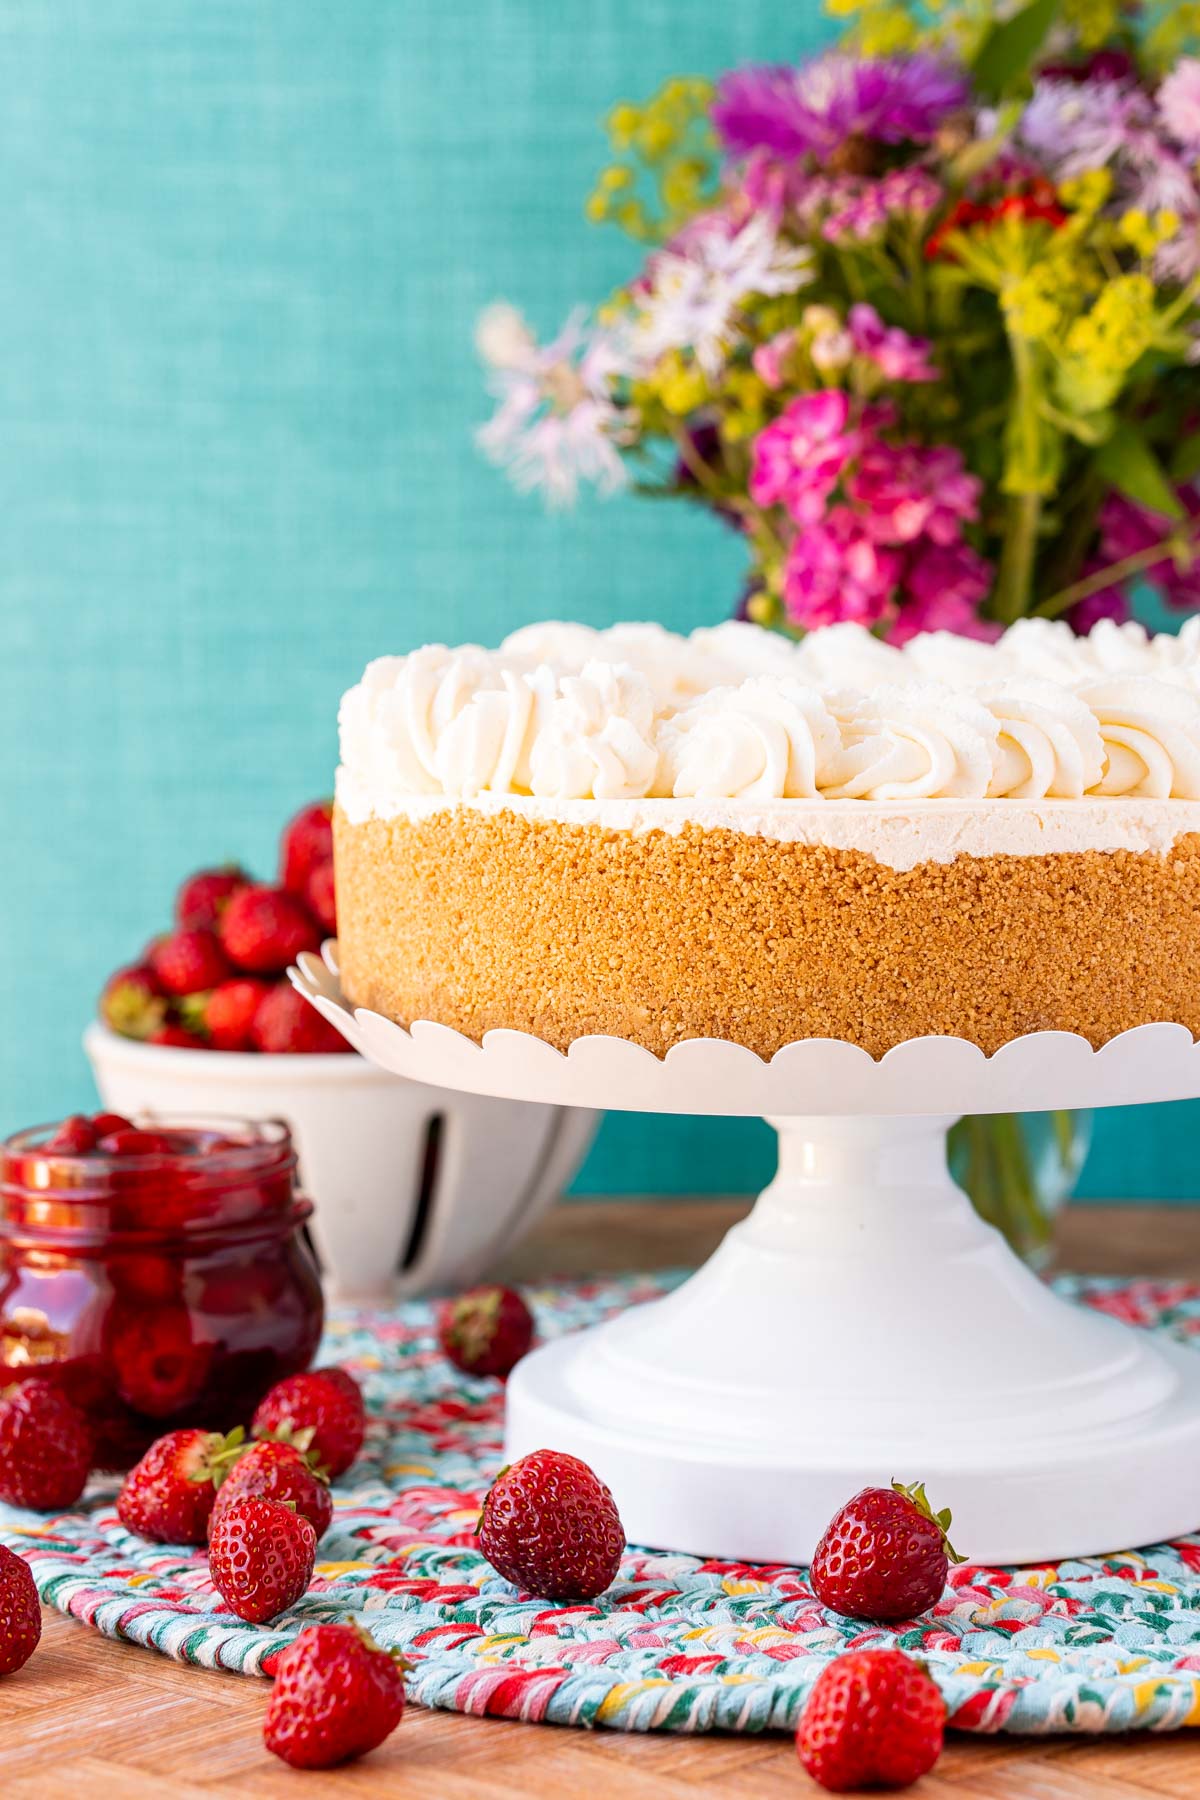 A no bake cheesecake on a white cake stand with strawberries and flowers in the background.